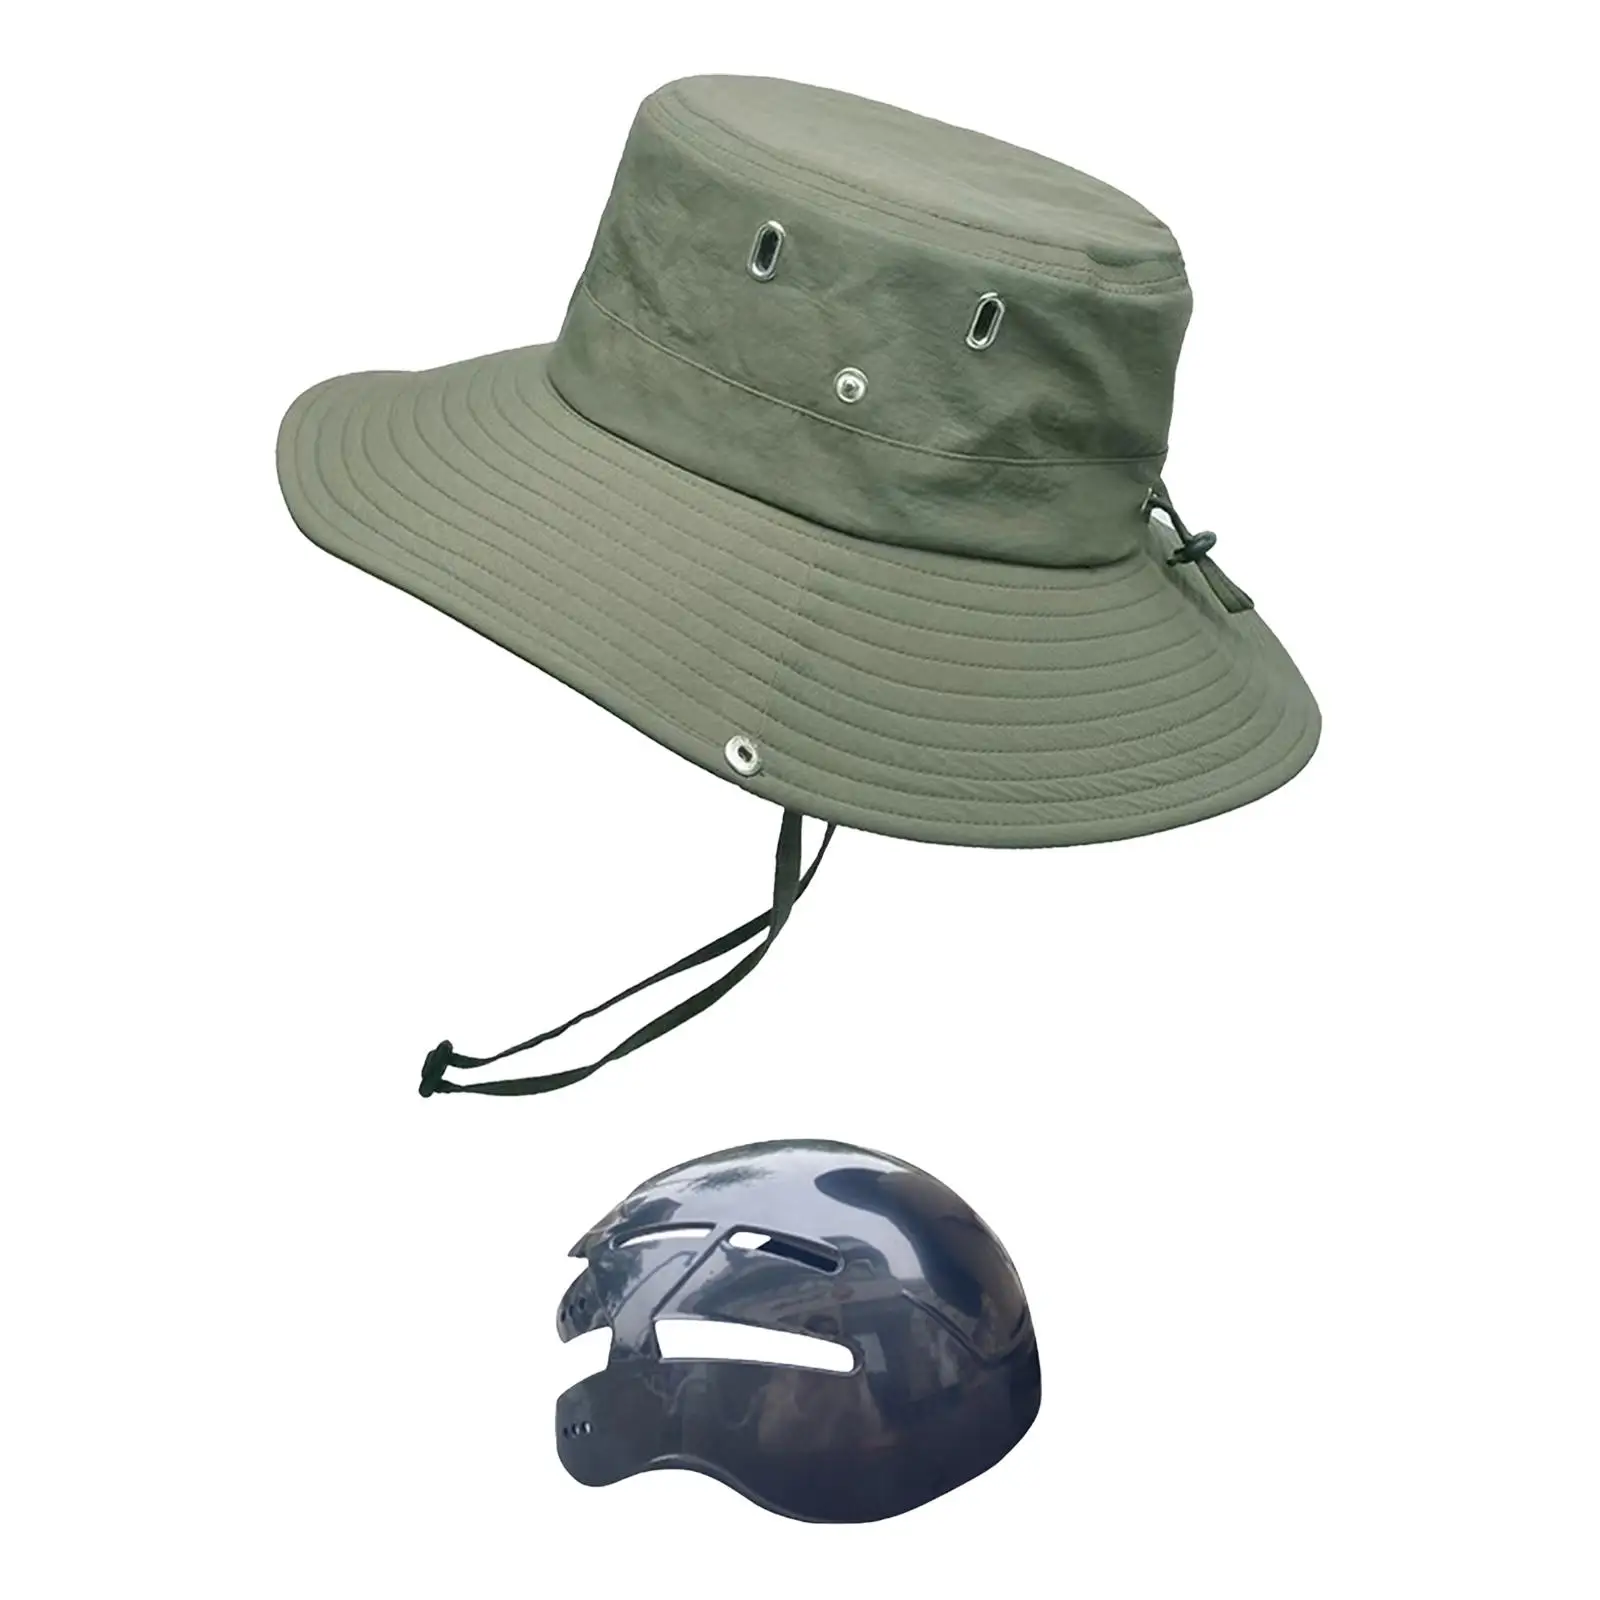 Bucket Hat with Insert for Men Women Sun Hat for Vacation Hiking Cycling